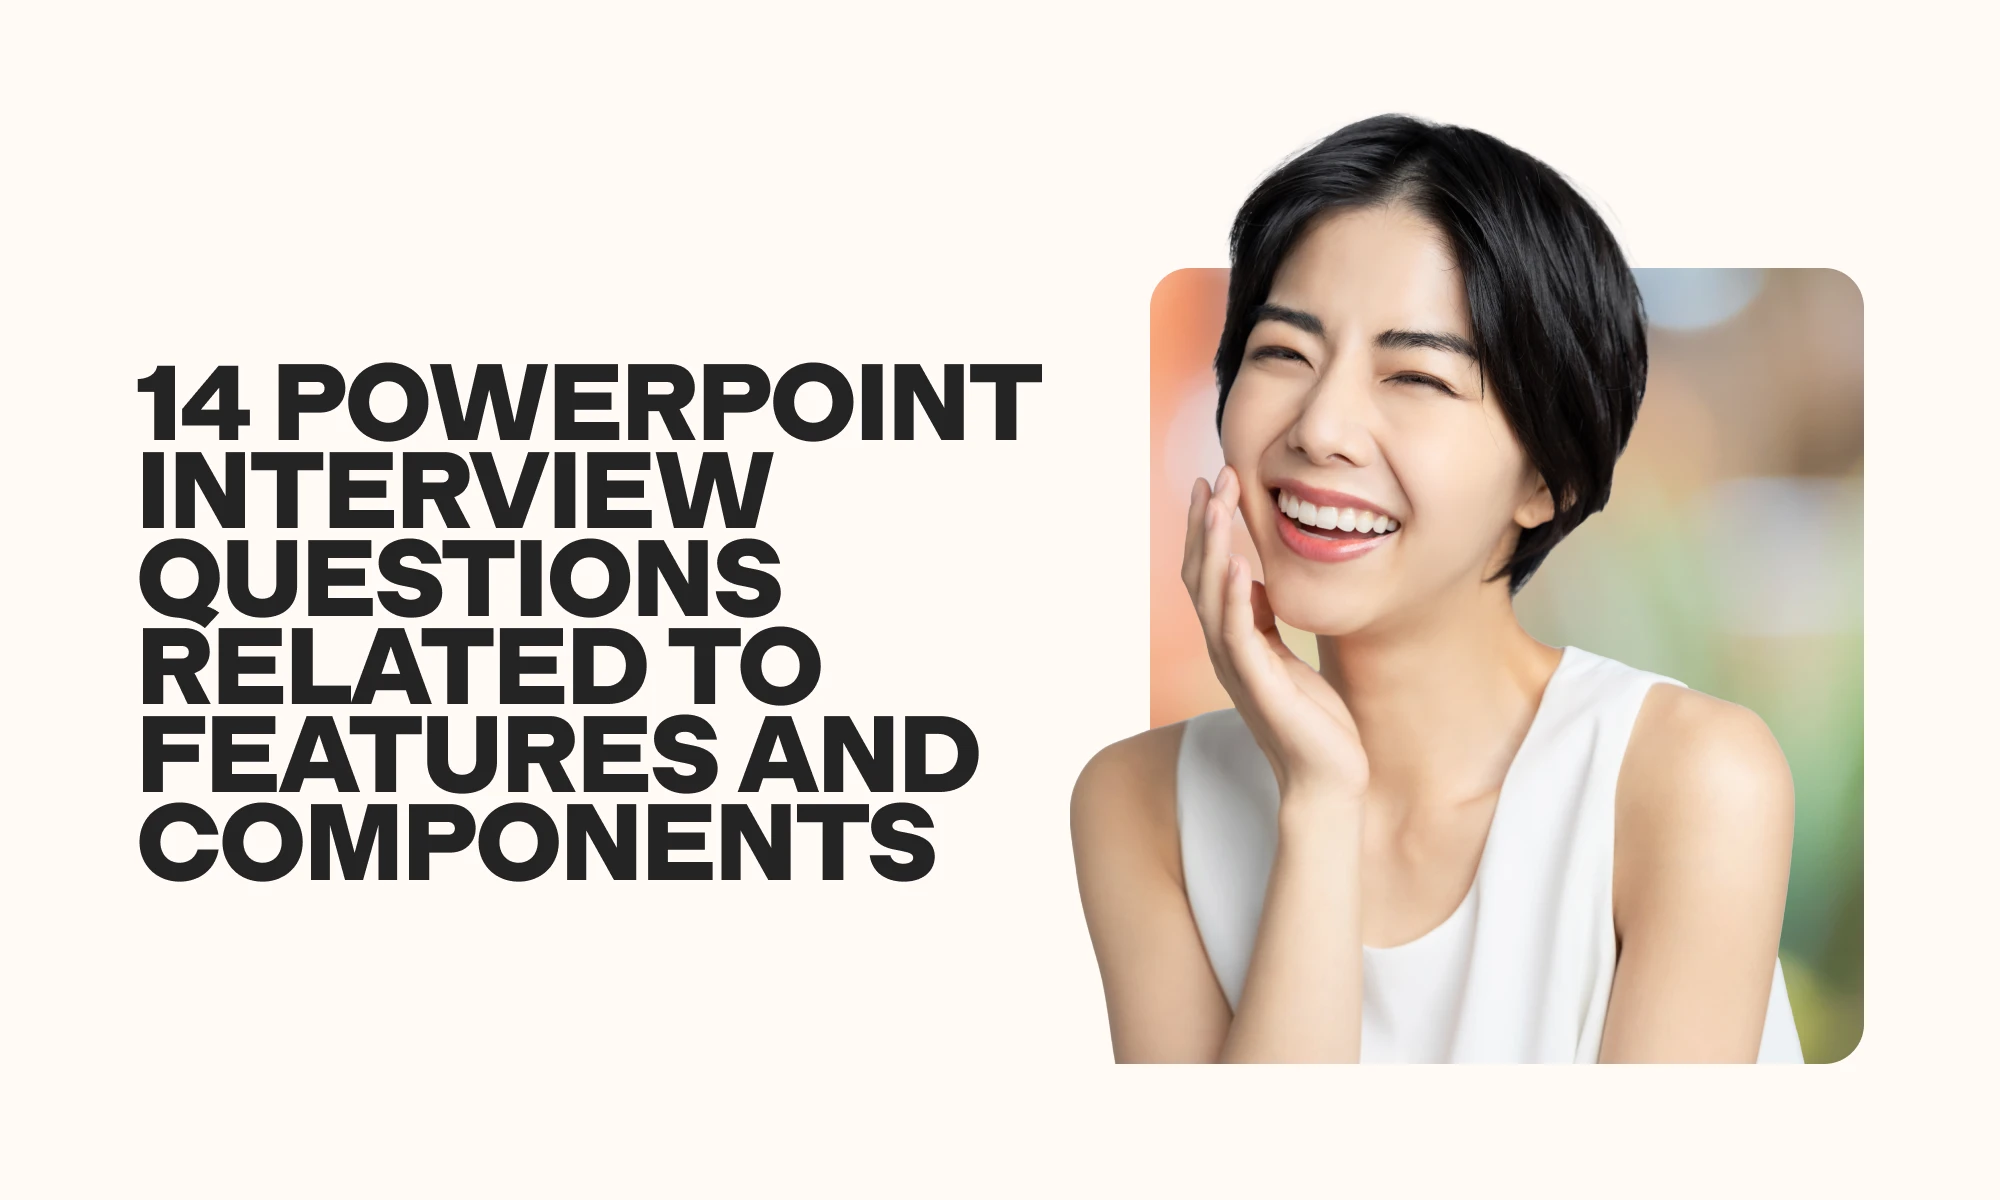 PowerPoint interview questions related to features and components